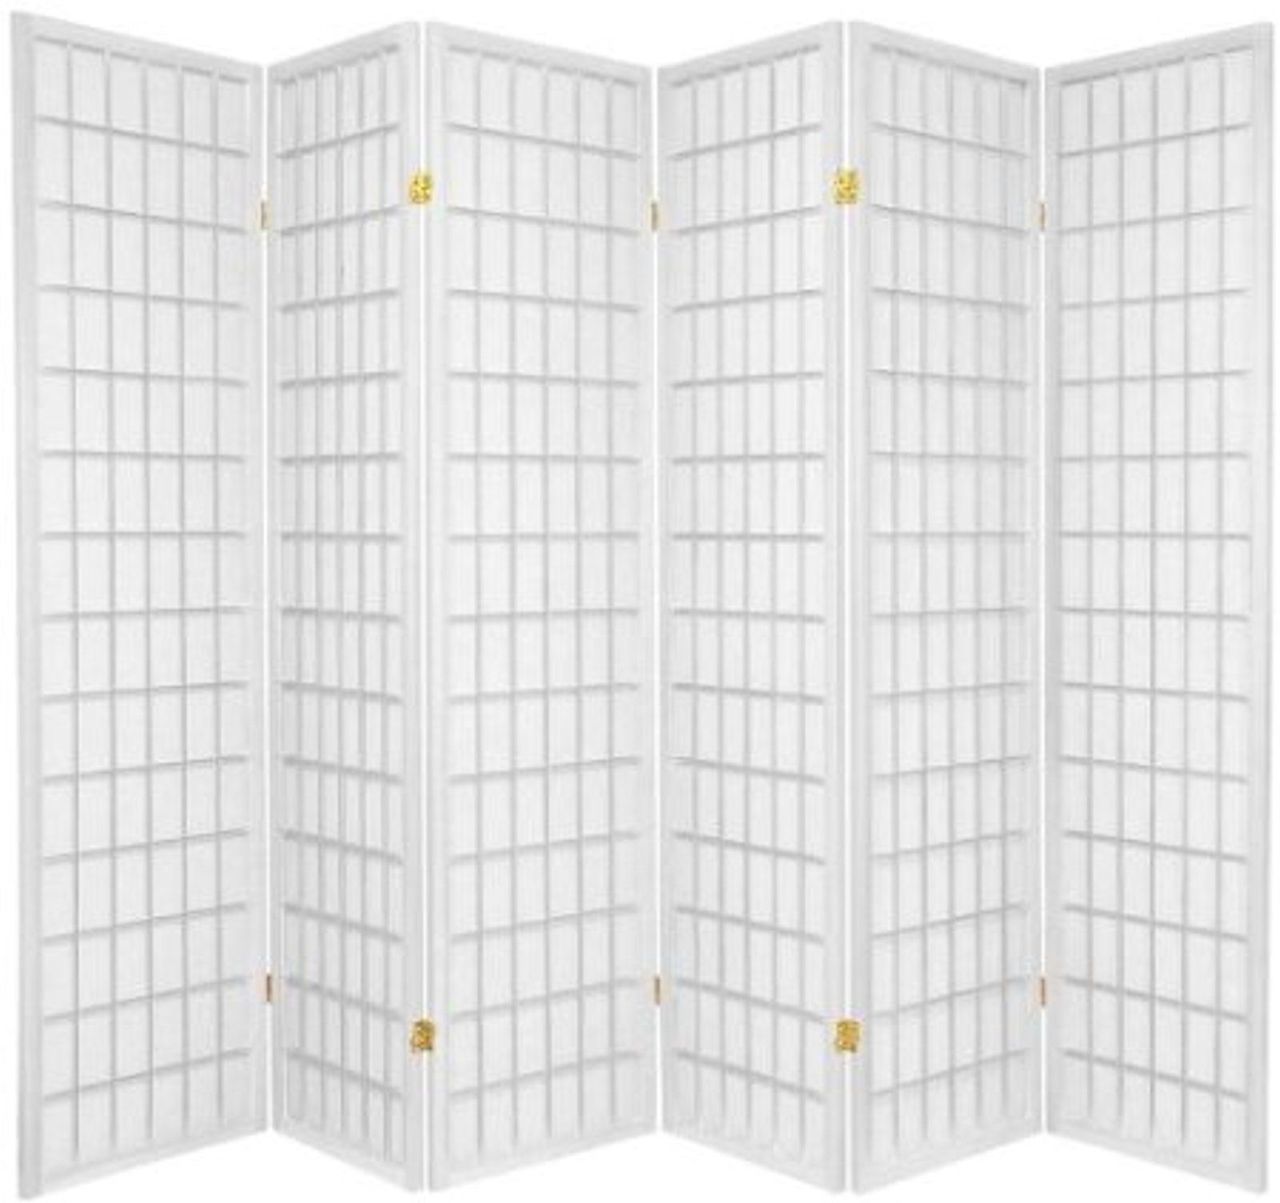 Legacy Decor Japanese Oriental 6 Panel Room Divider, 71" Tall, White - image 1 of 2